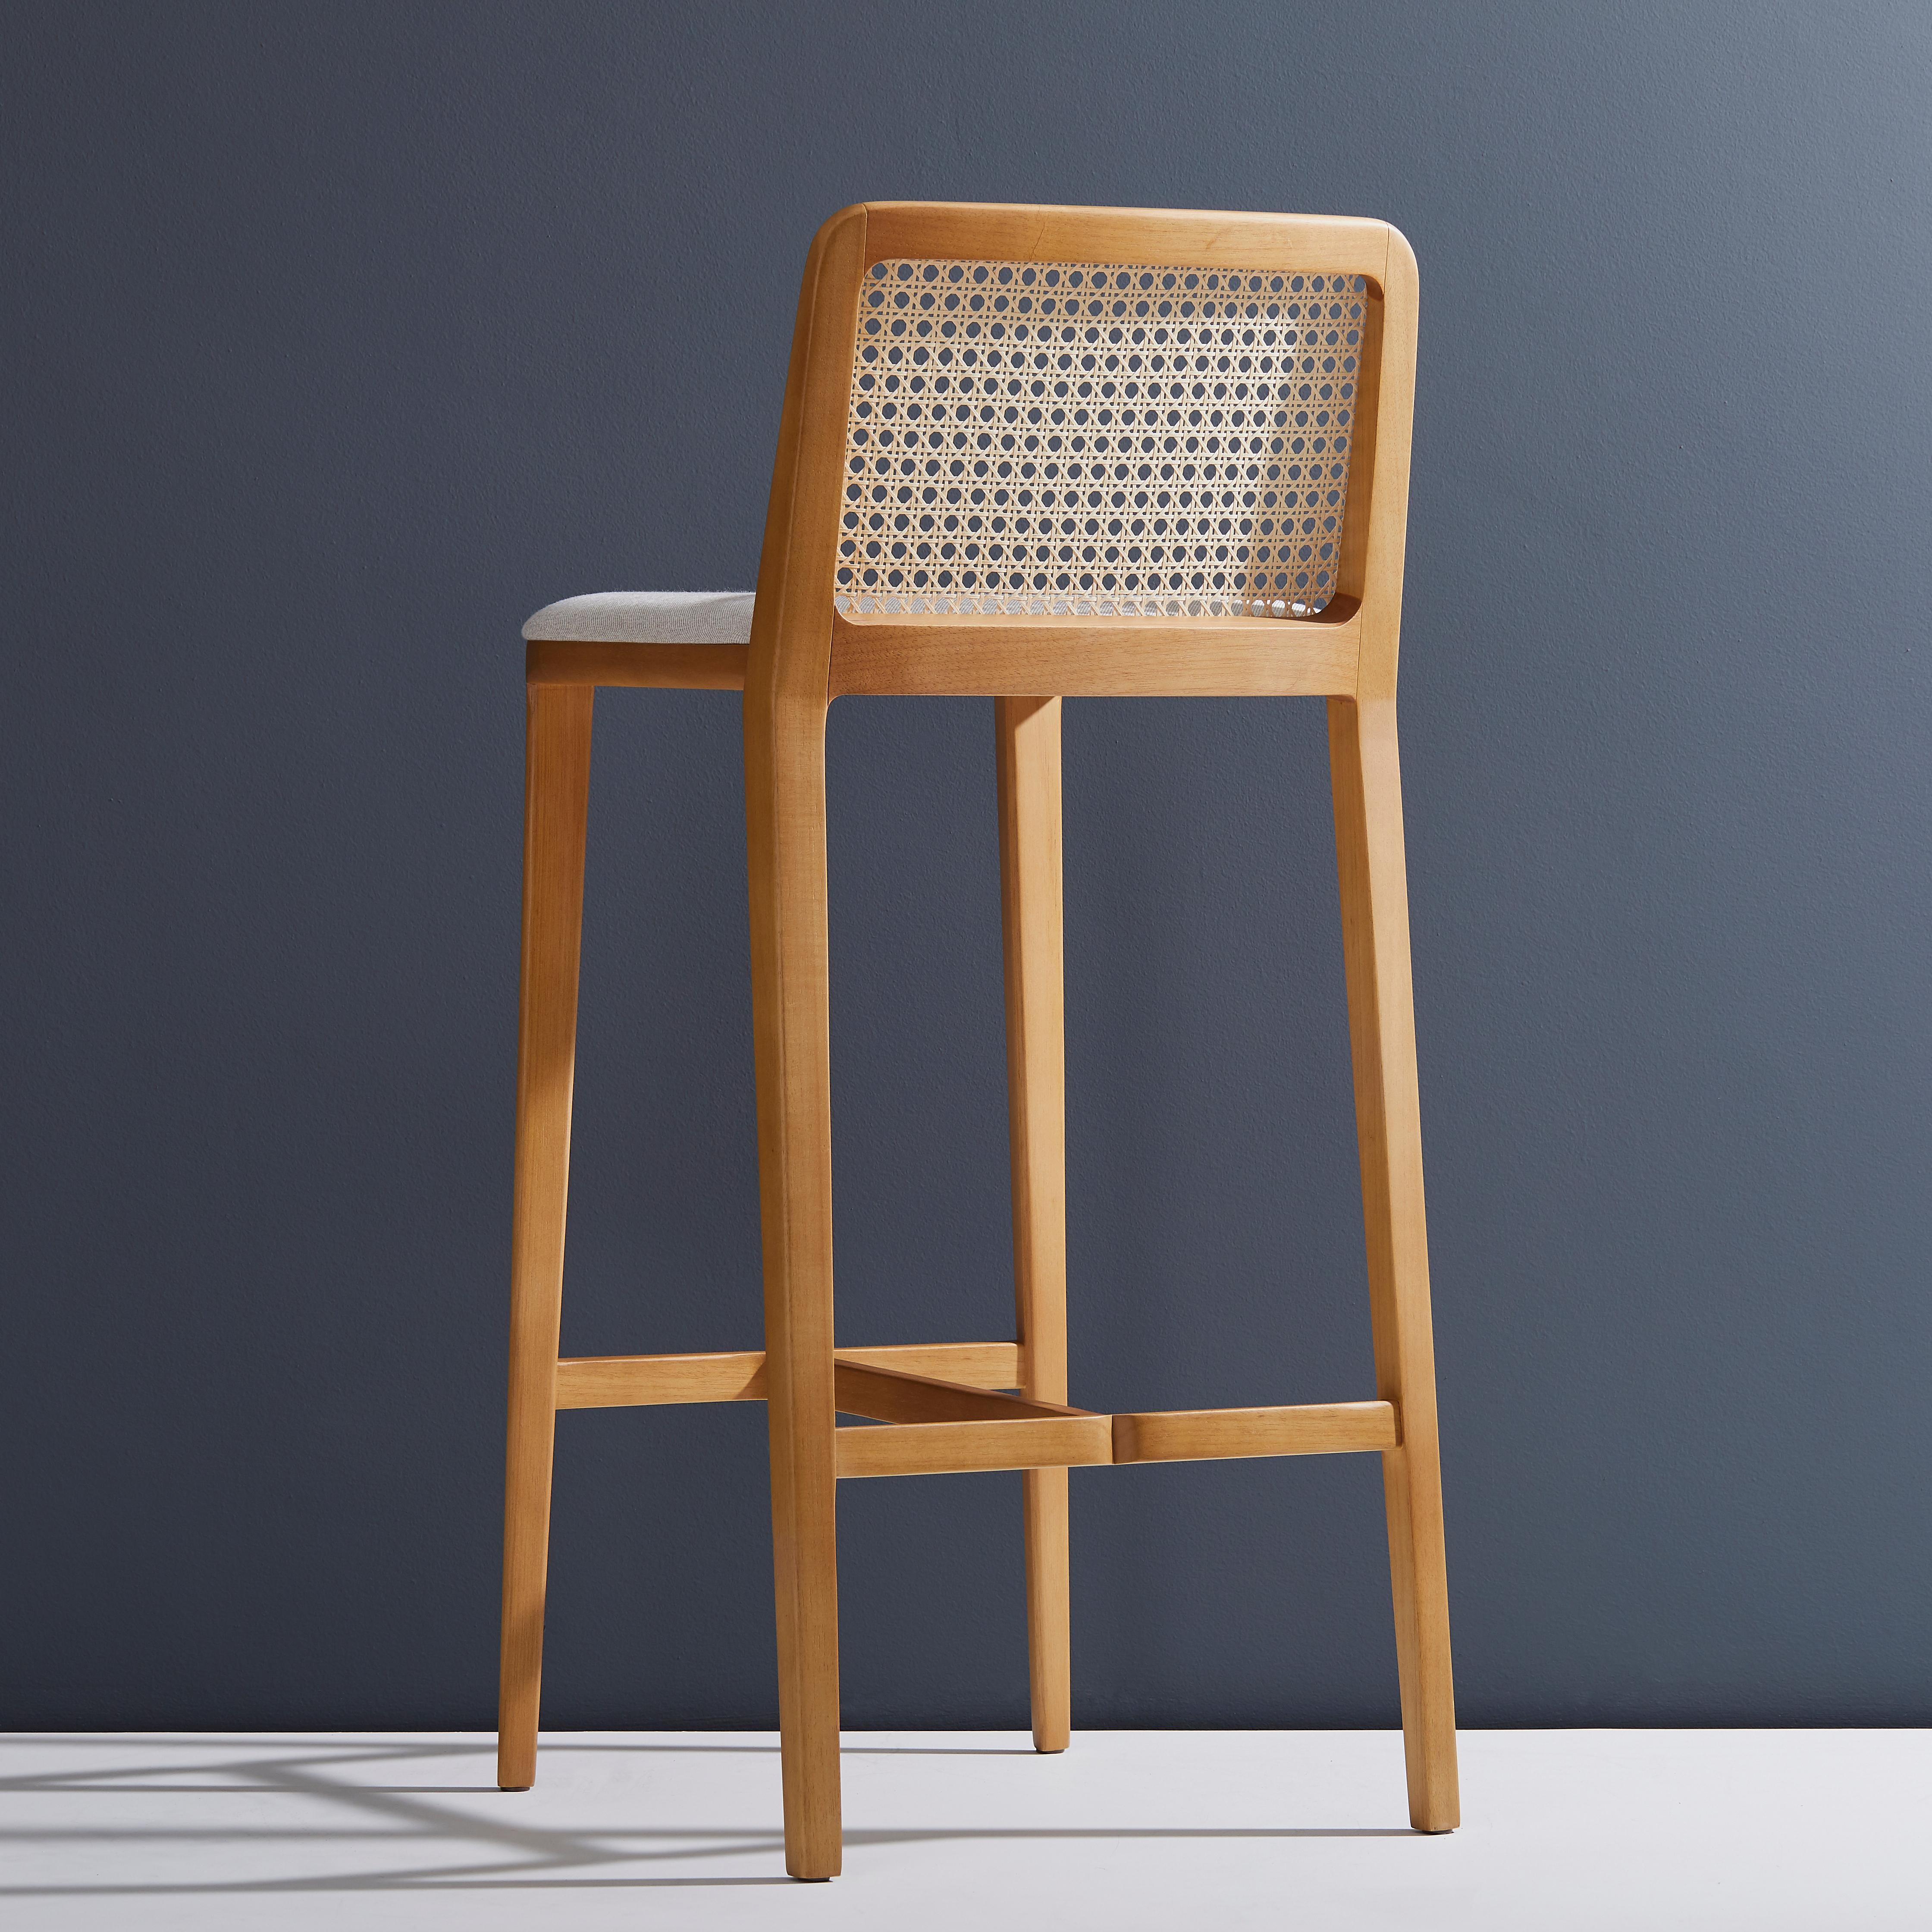 Minimal Style, Solid Wood Stool, Textiles or Leather Seatings, Caning Backboard For Sale 3